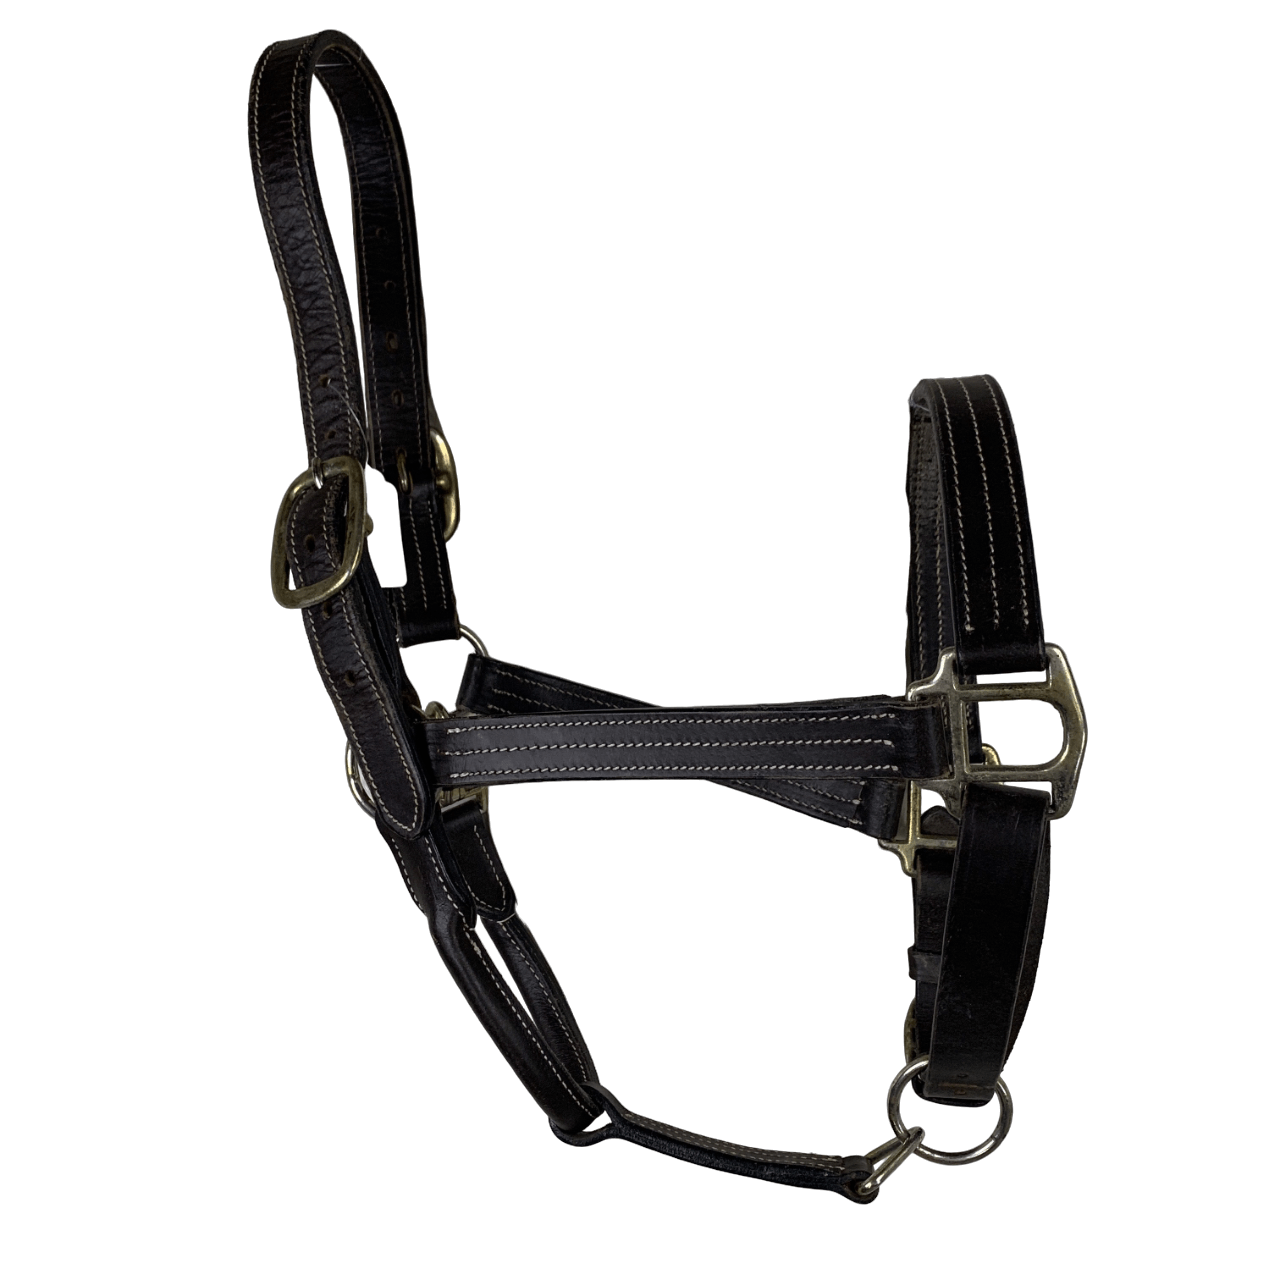 Triple Stitched Leather Halter